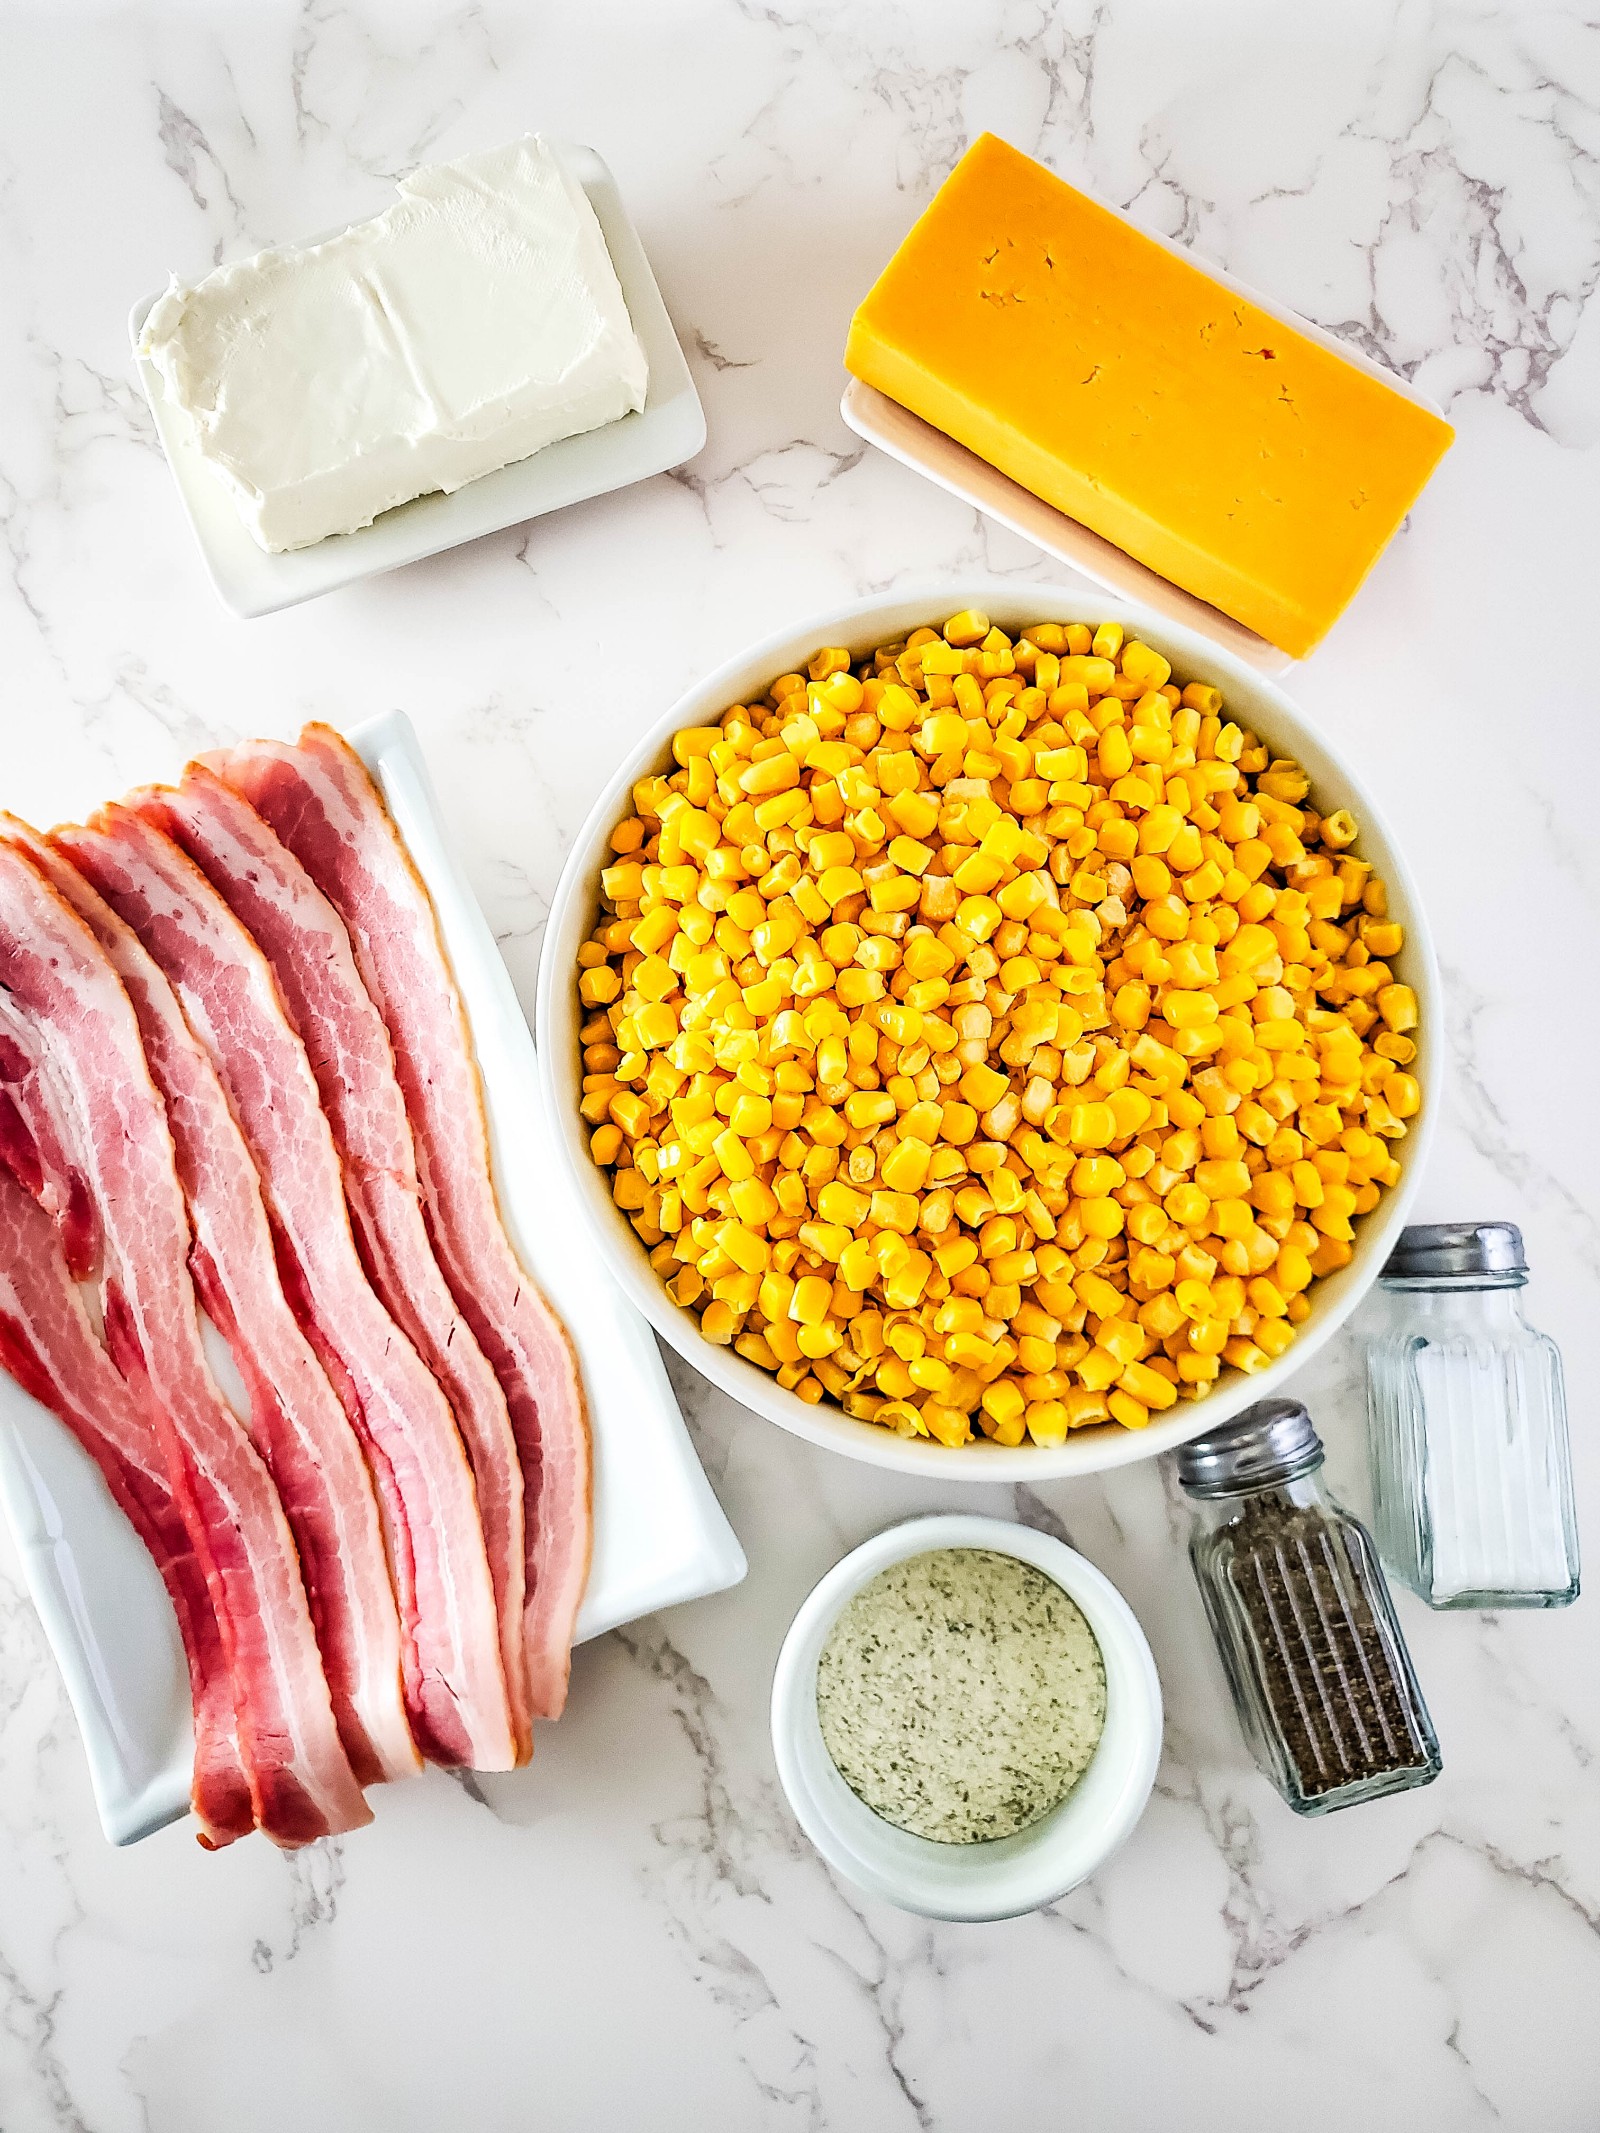 The ingredients for Crockpot corn with cream cheese. Bacon, cream cheese, frozen corn, ranch seasoning, and cheddar cheese.